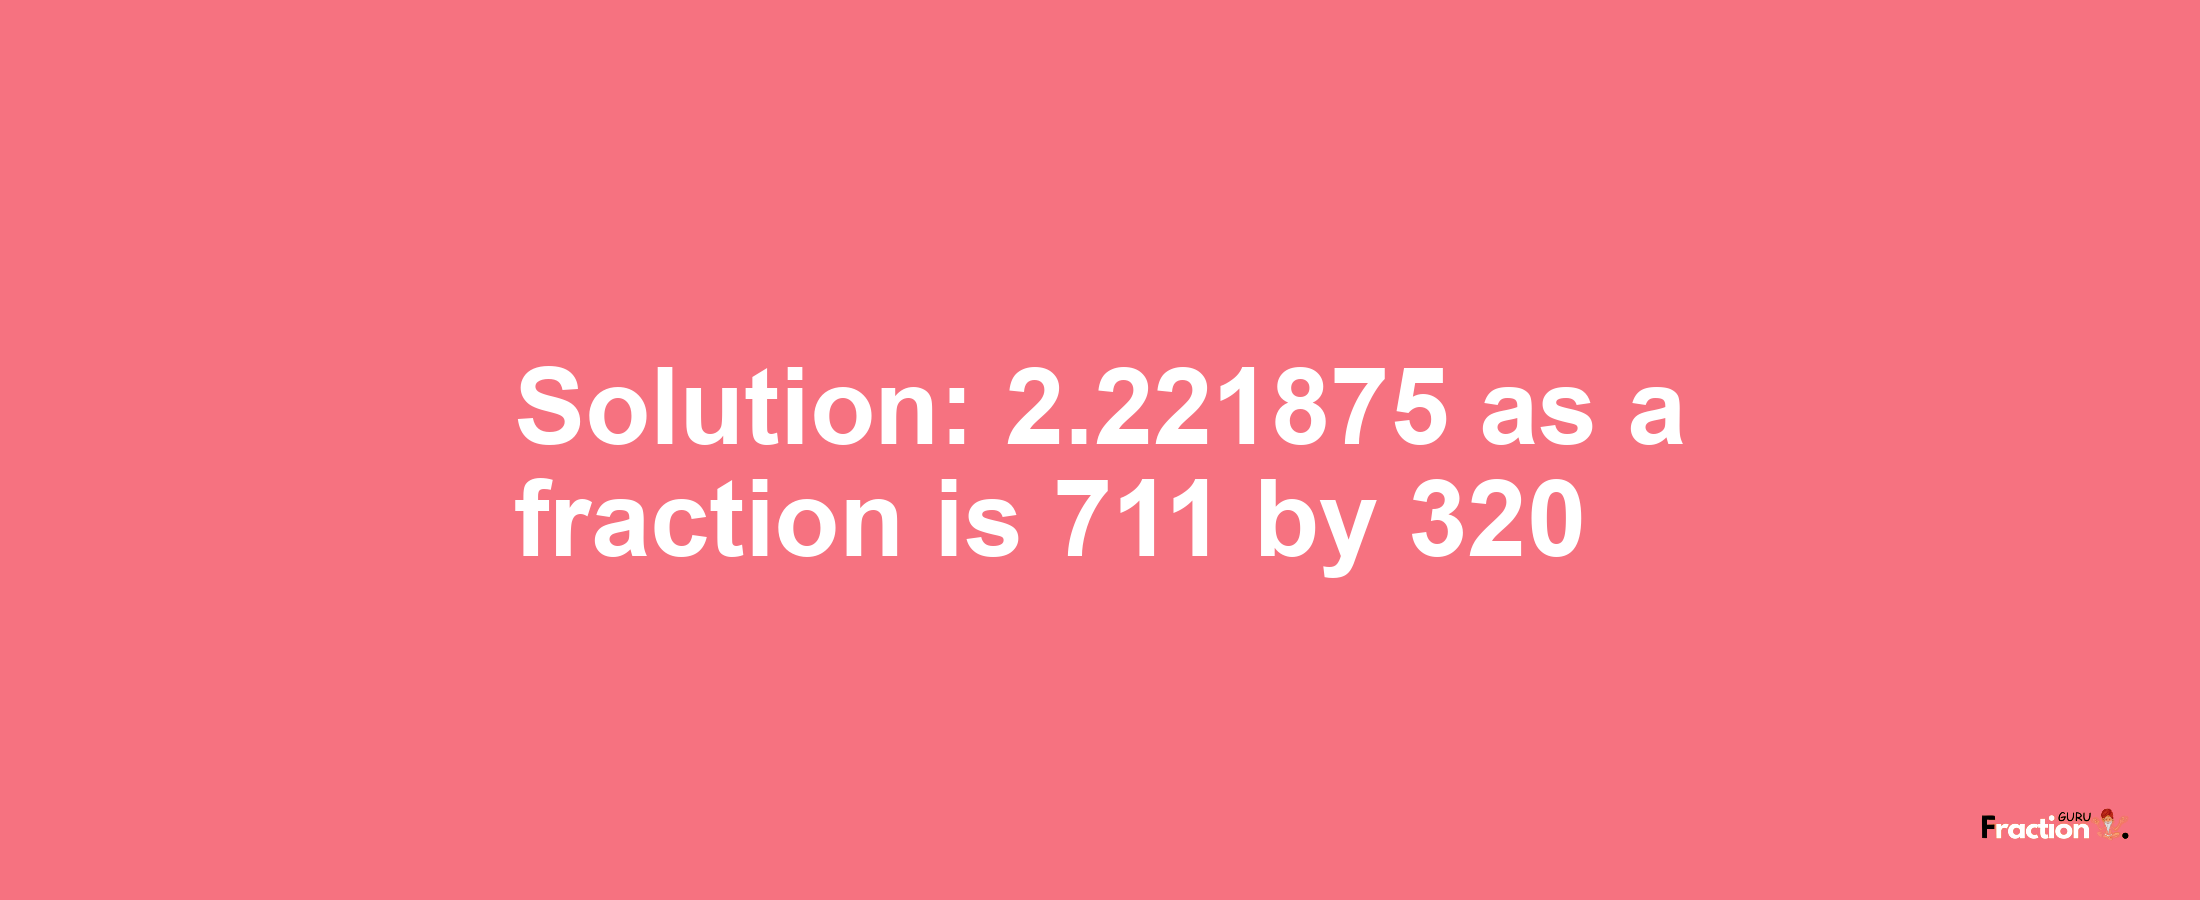 Solution:2.221875 as a fraction is 711/320